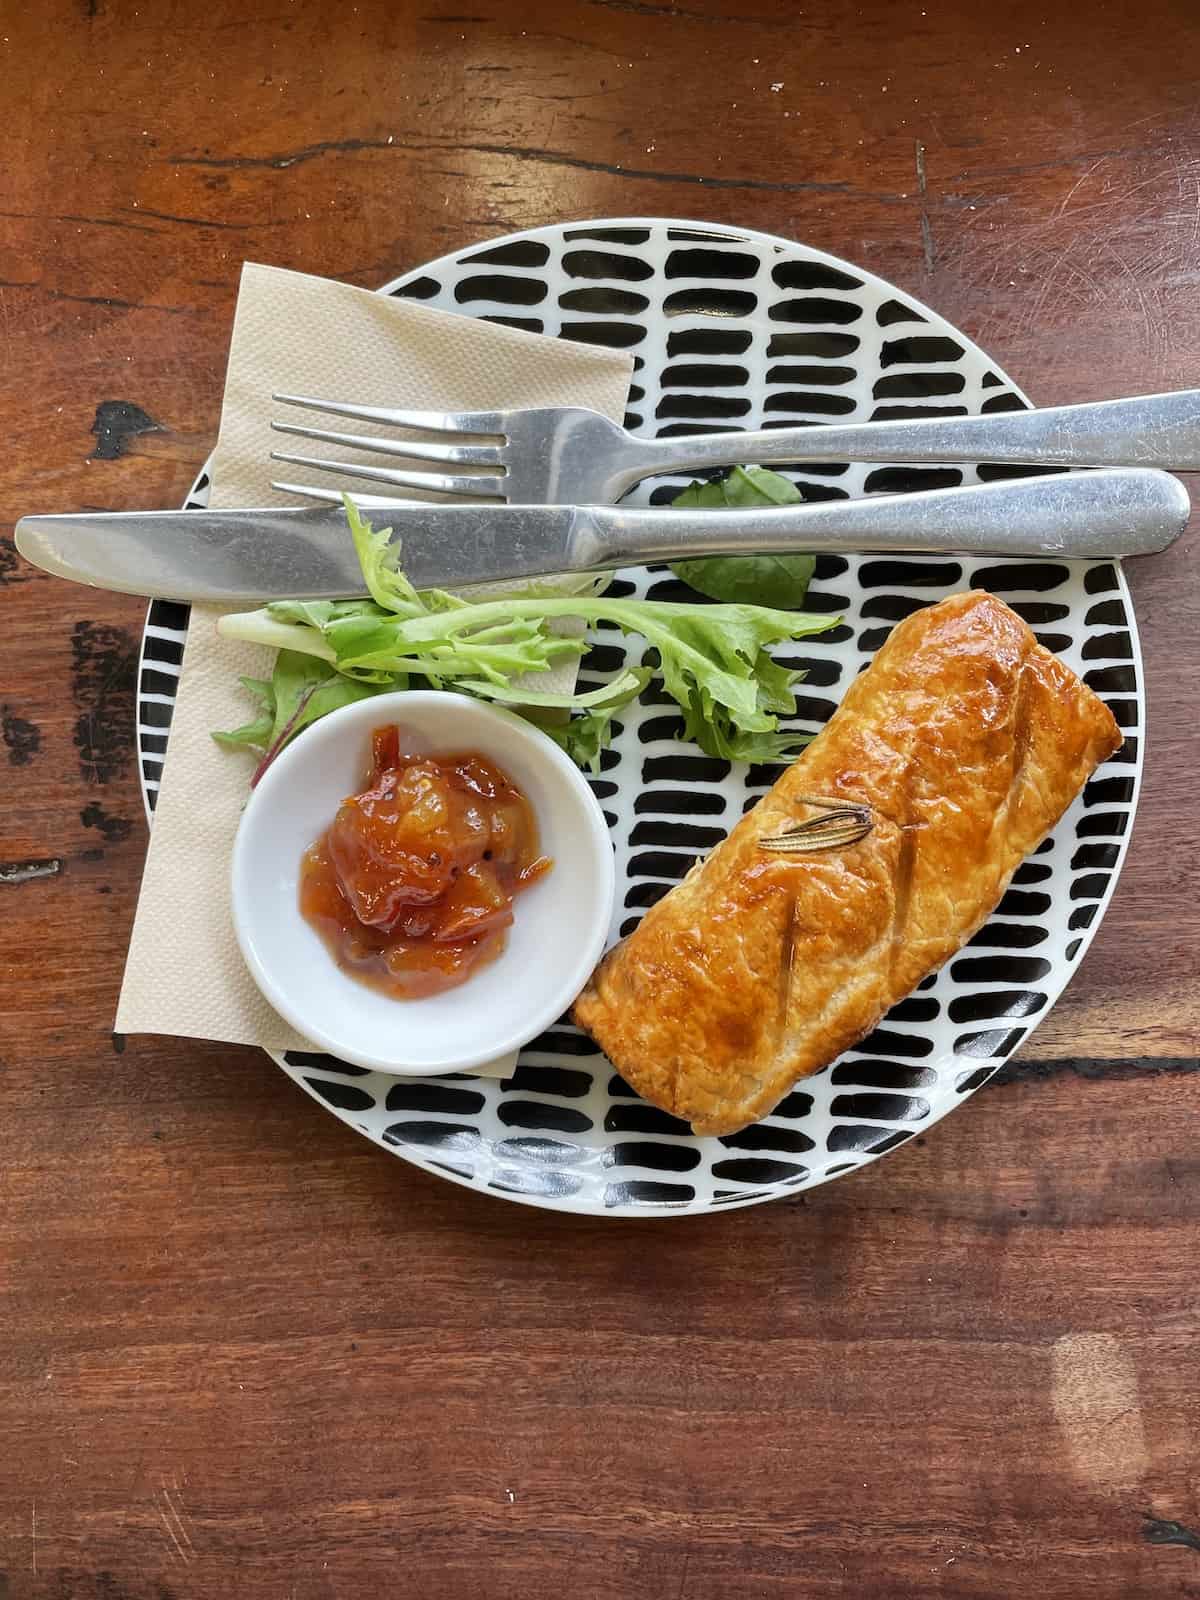 Sausage roll on a black and white plate with bowl of chutney.